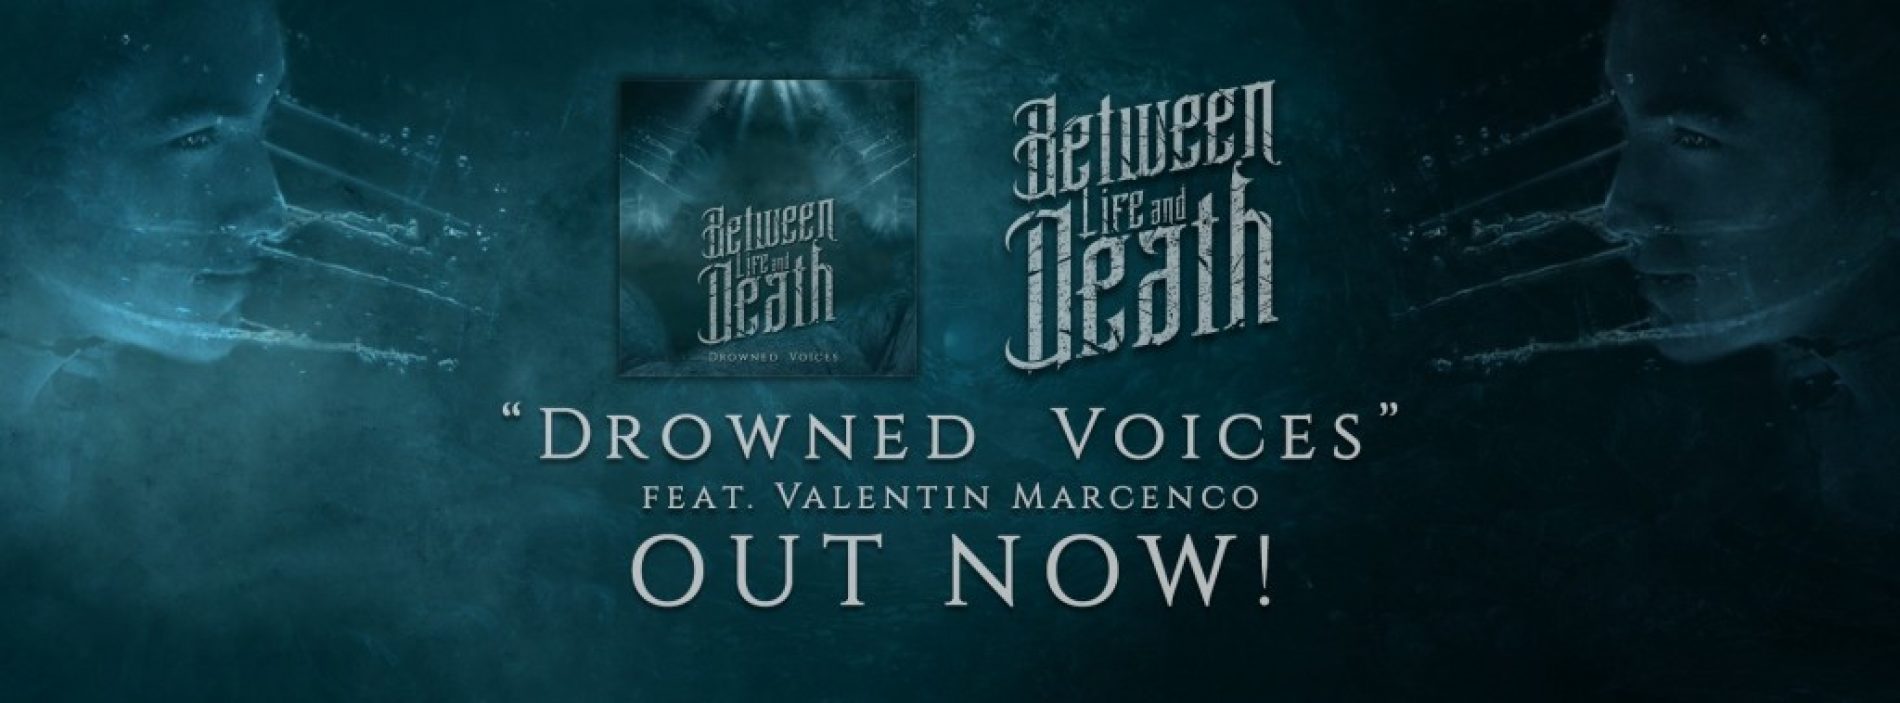 Between Life and Death ft Valentin Marcenco – Drowned Voices (audio)